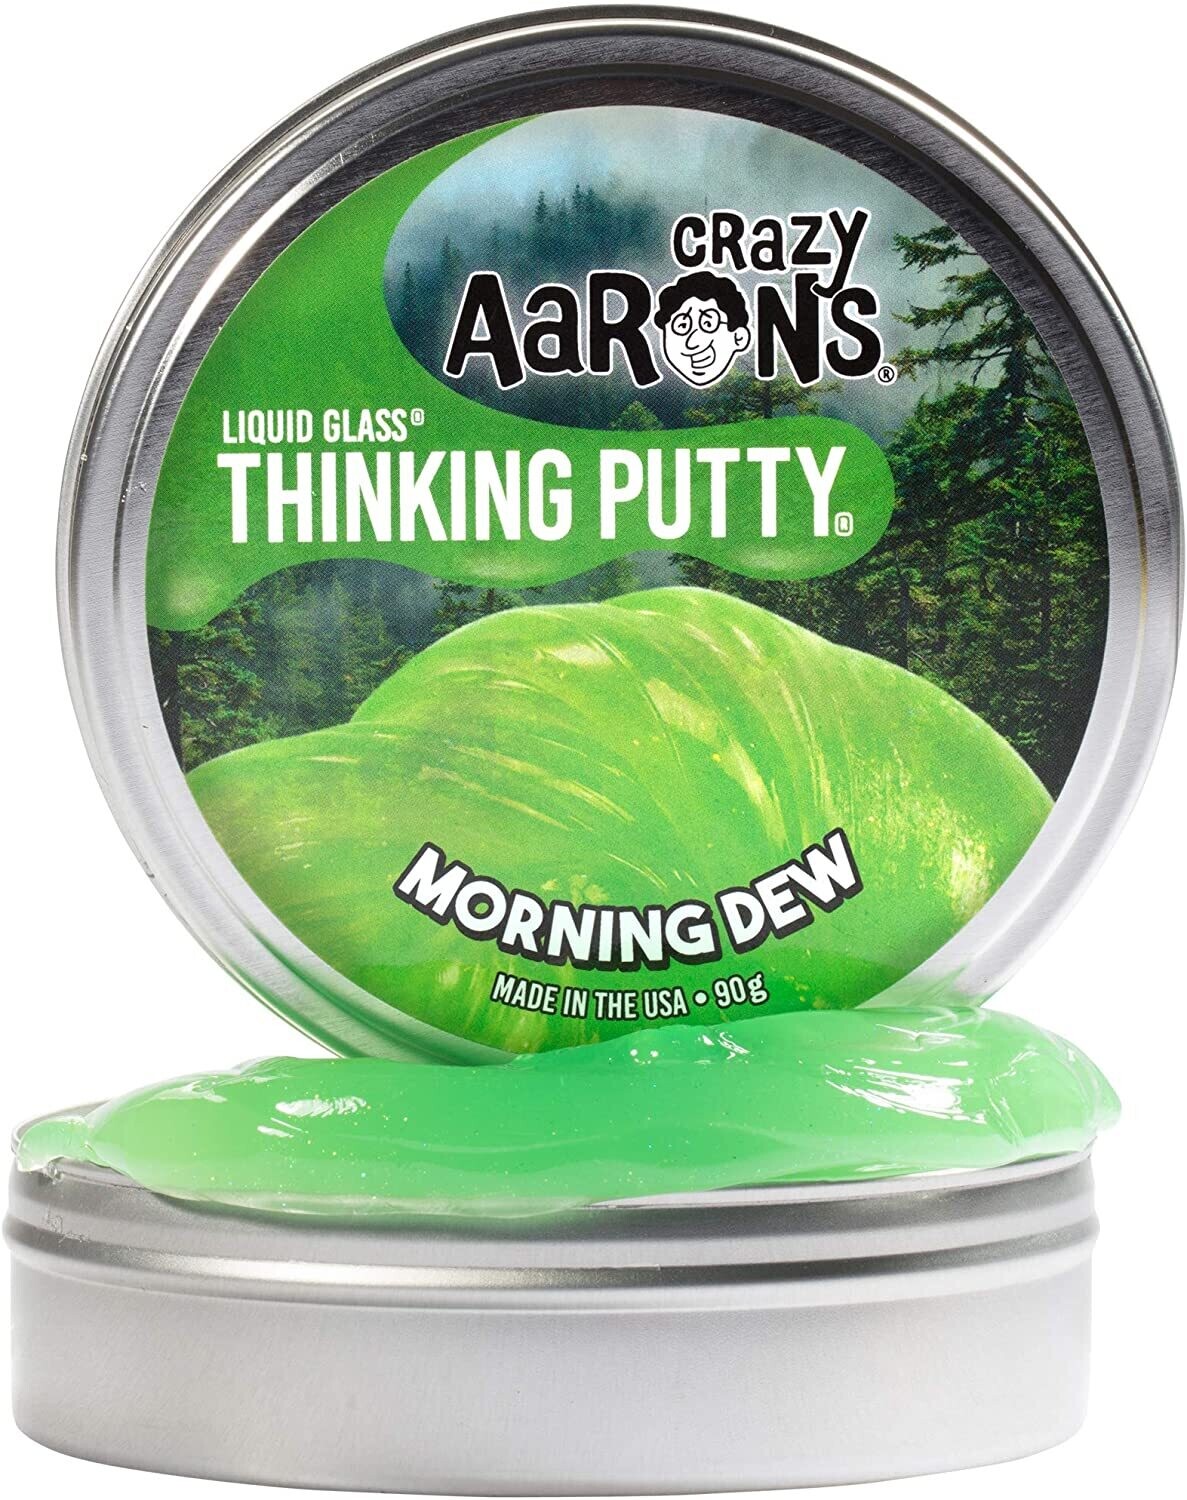 Crazy Aaron's Thinking Putty Liquid Glass Morning Dew